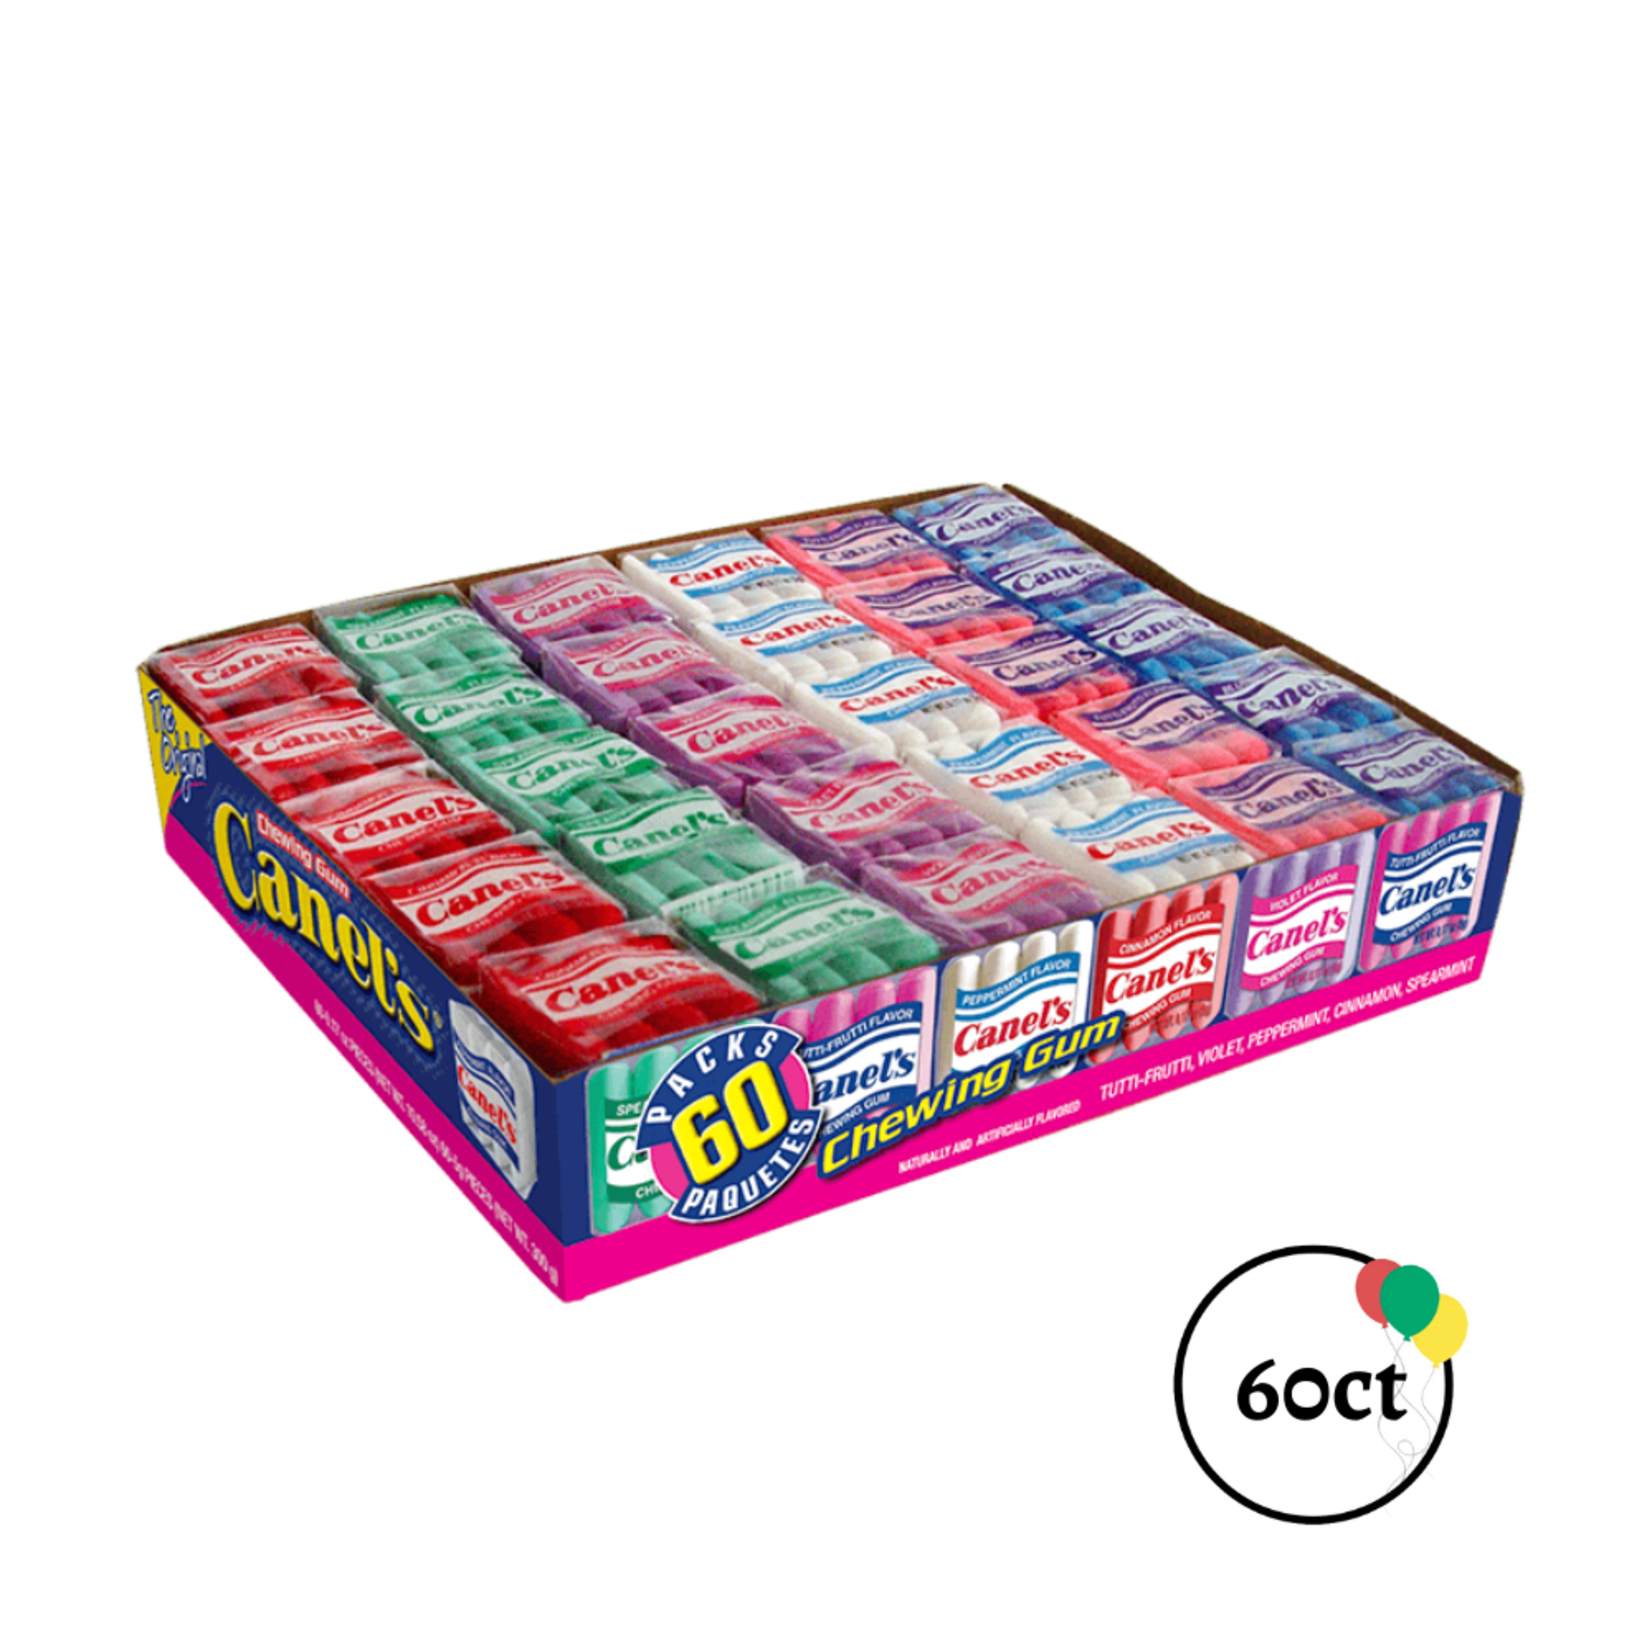 Canel's Canel's Chewing Gum 60ct